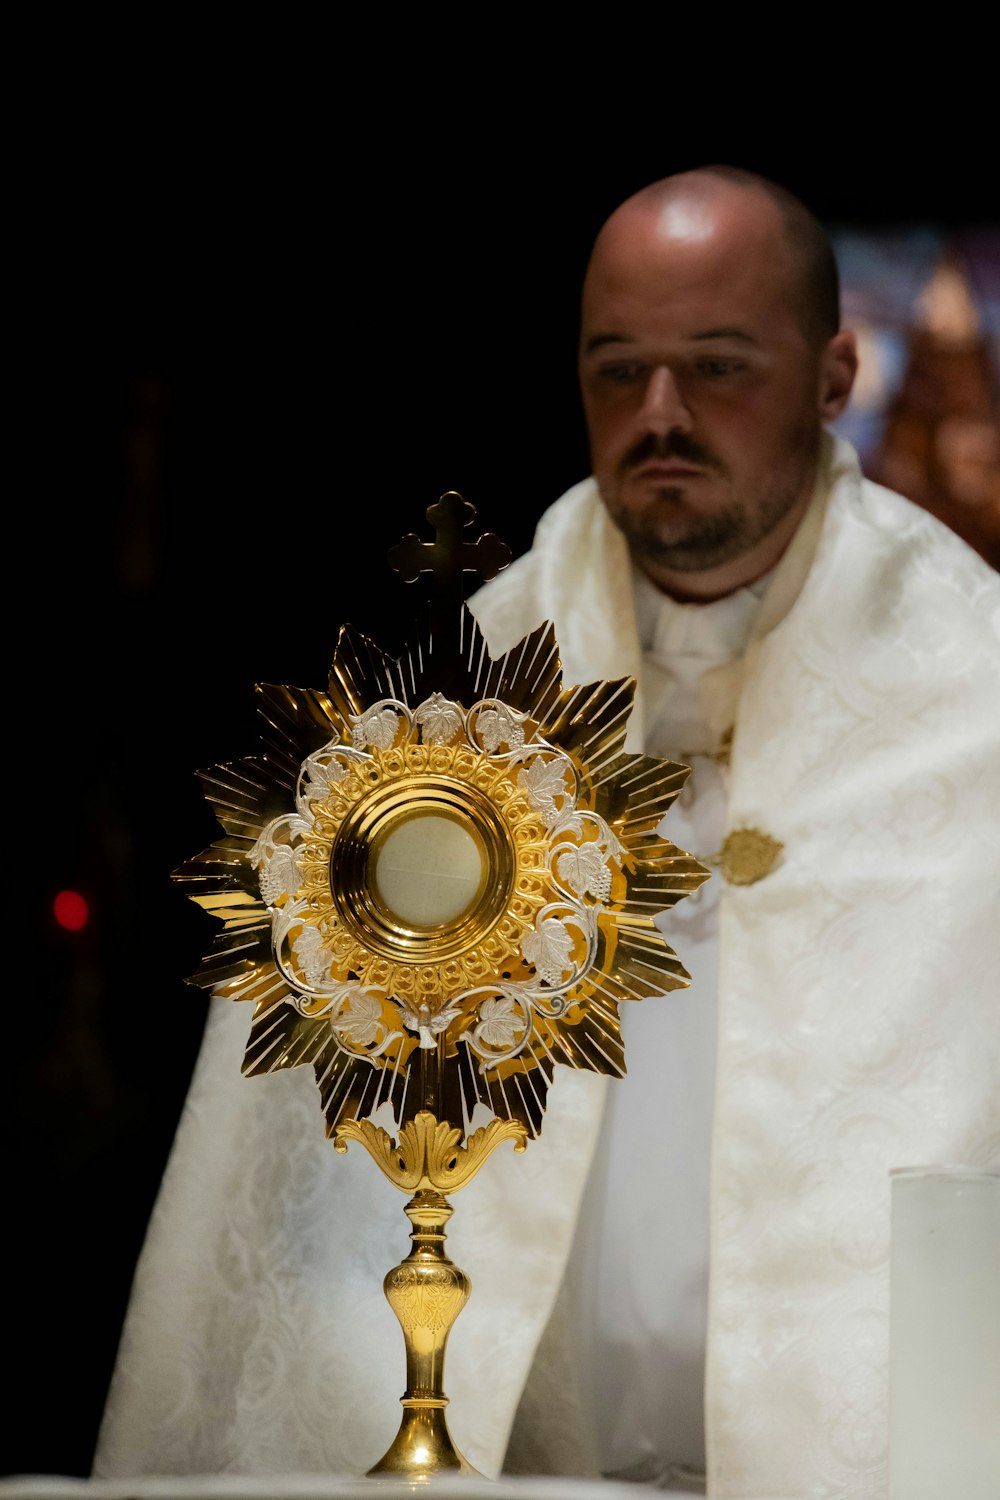 a man in a priest's robes holding a golden cross